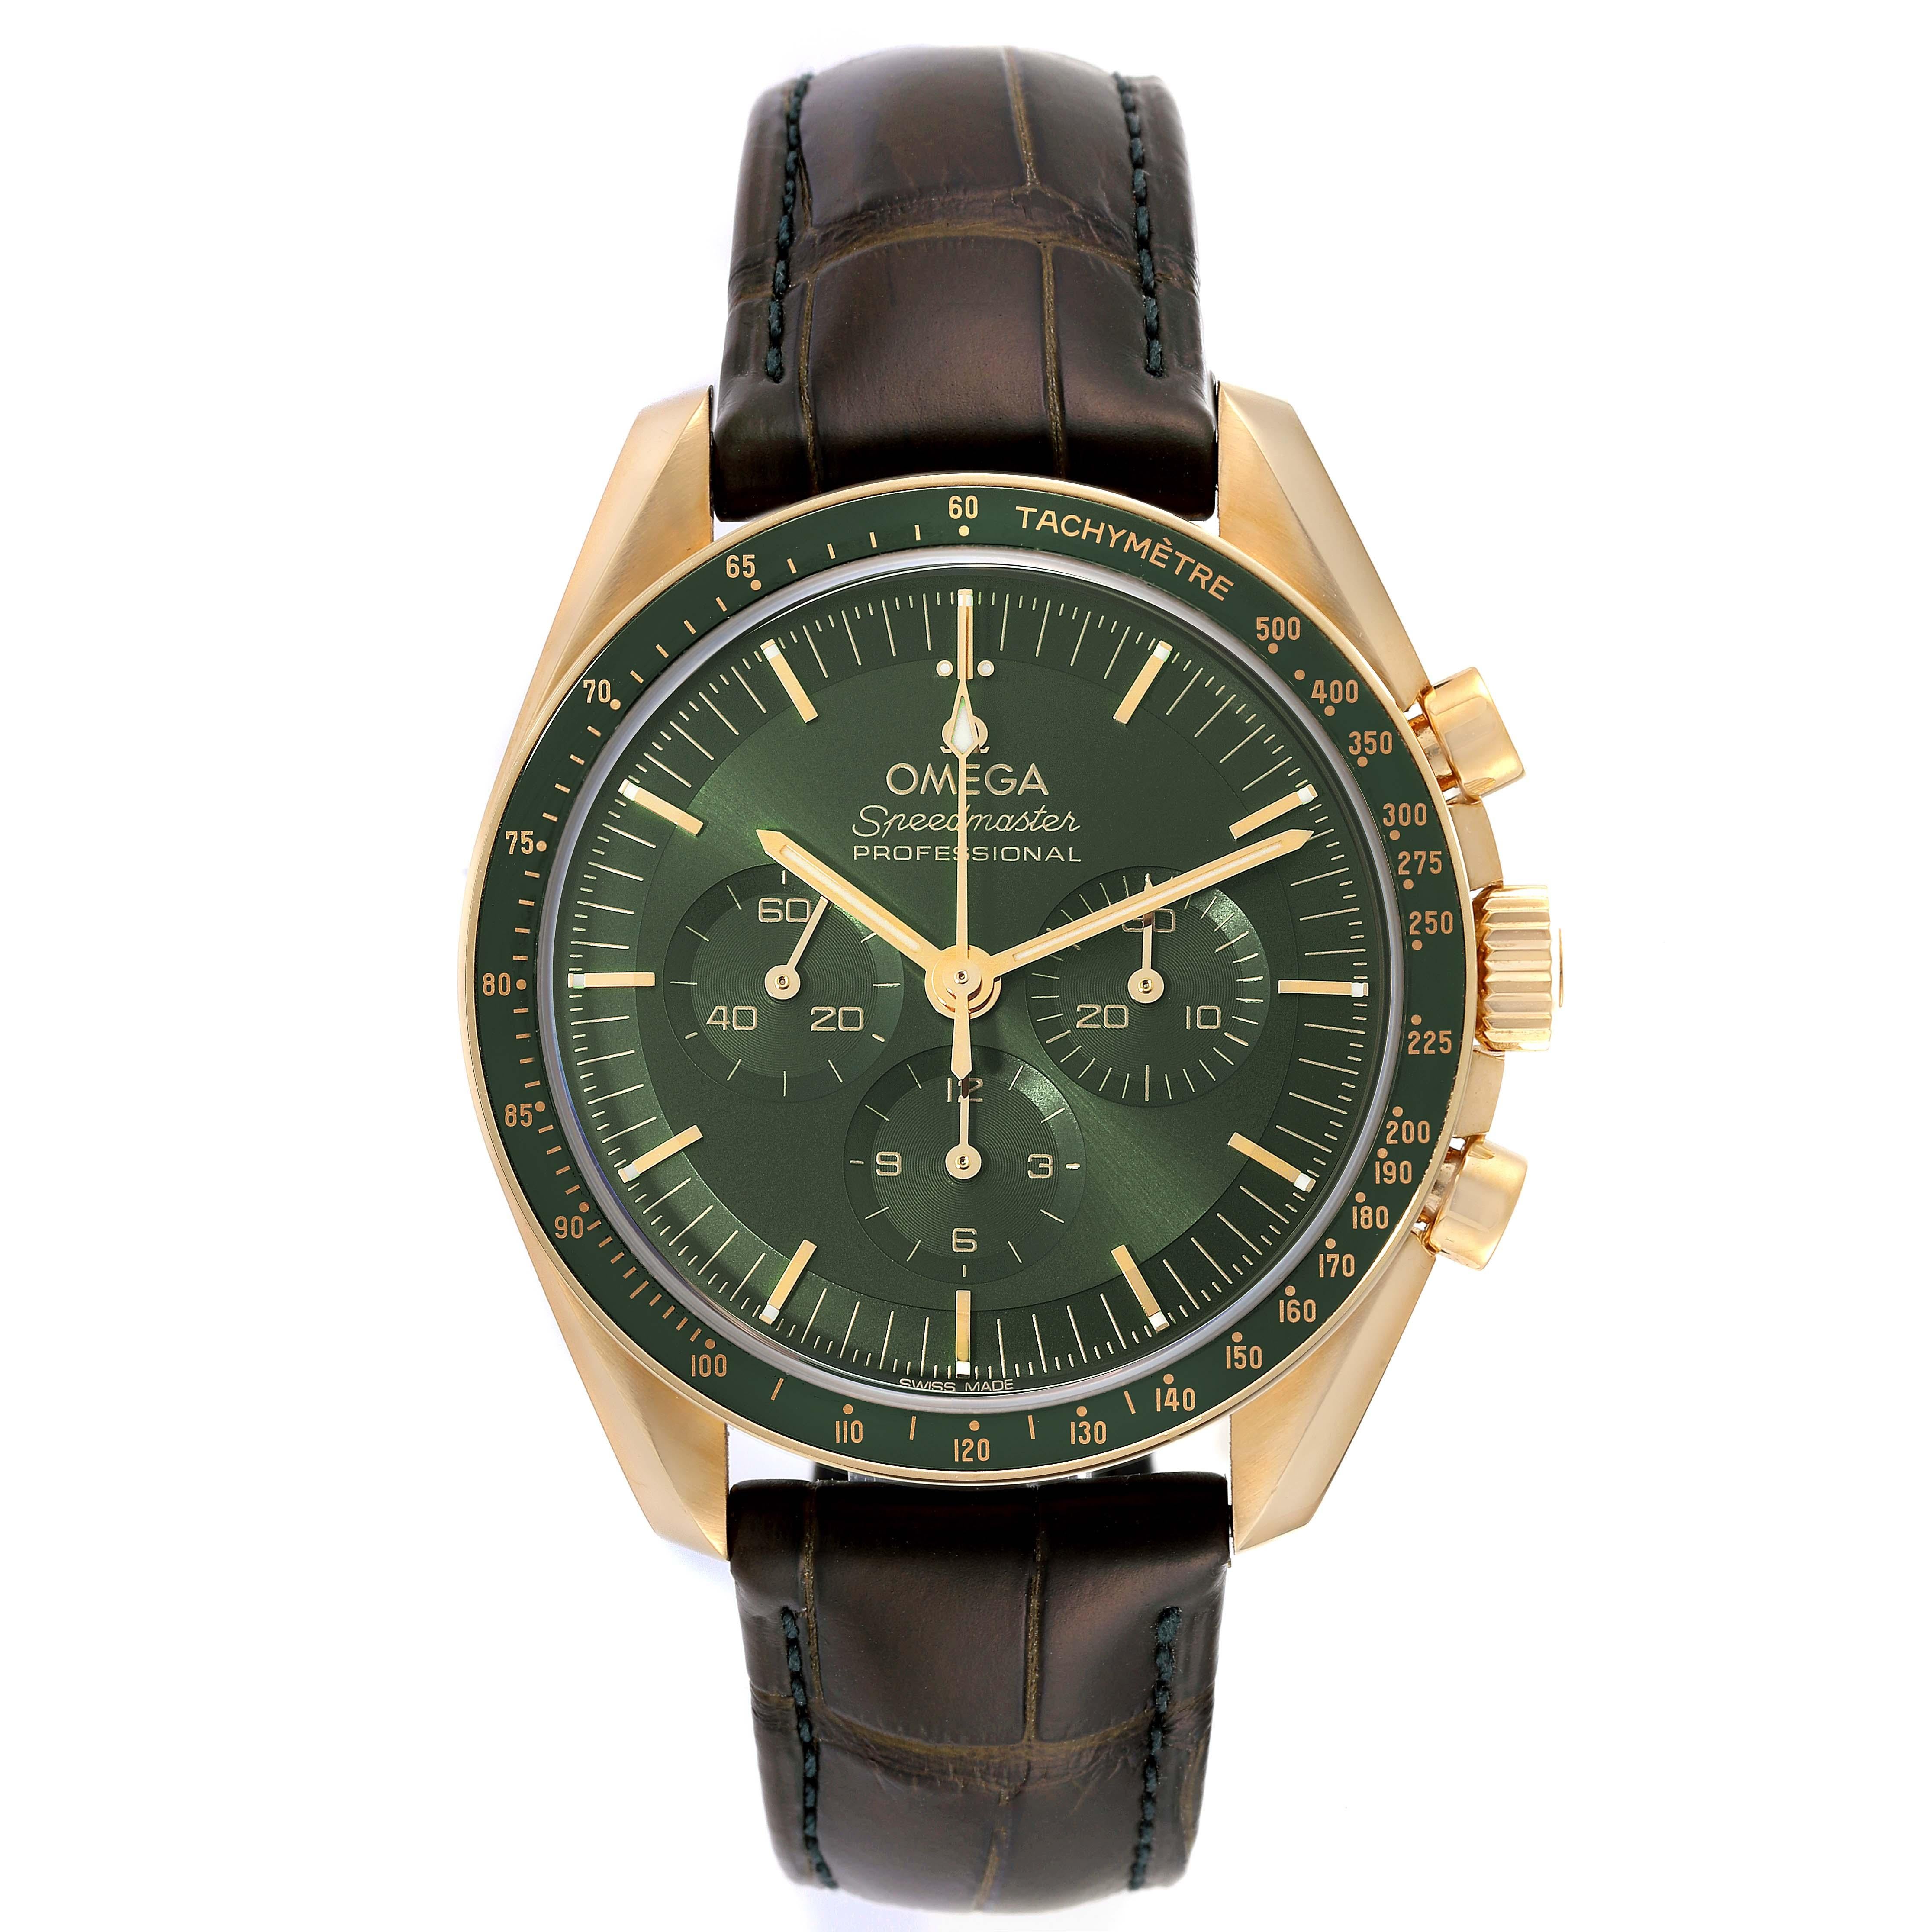 Omega Speedmaster Moonwatch Yellow Gold Mens Watch 310.63.42.50.10.001 Box Card. Manual-winding chronograph movement. 18k yellow gold round case 42.0 mm in diameter. Exhibition transparent sapphire crystal case back. 18k yellow gold bezel with green